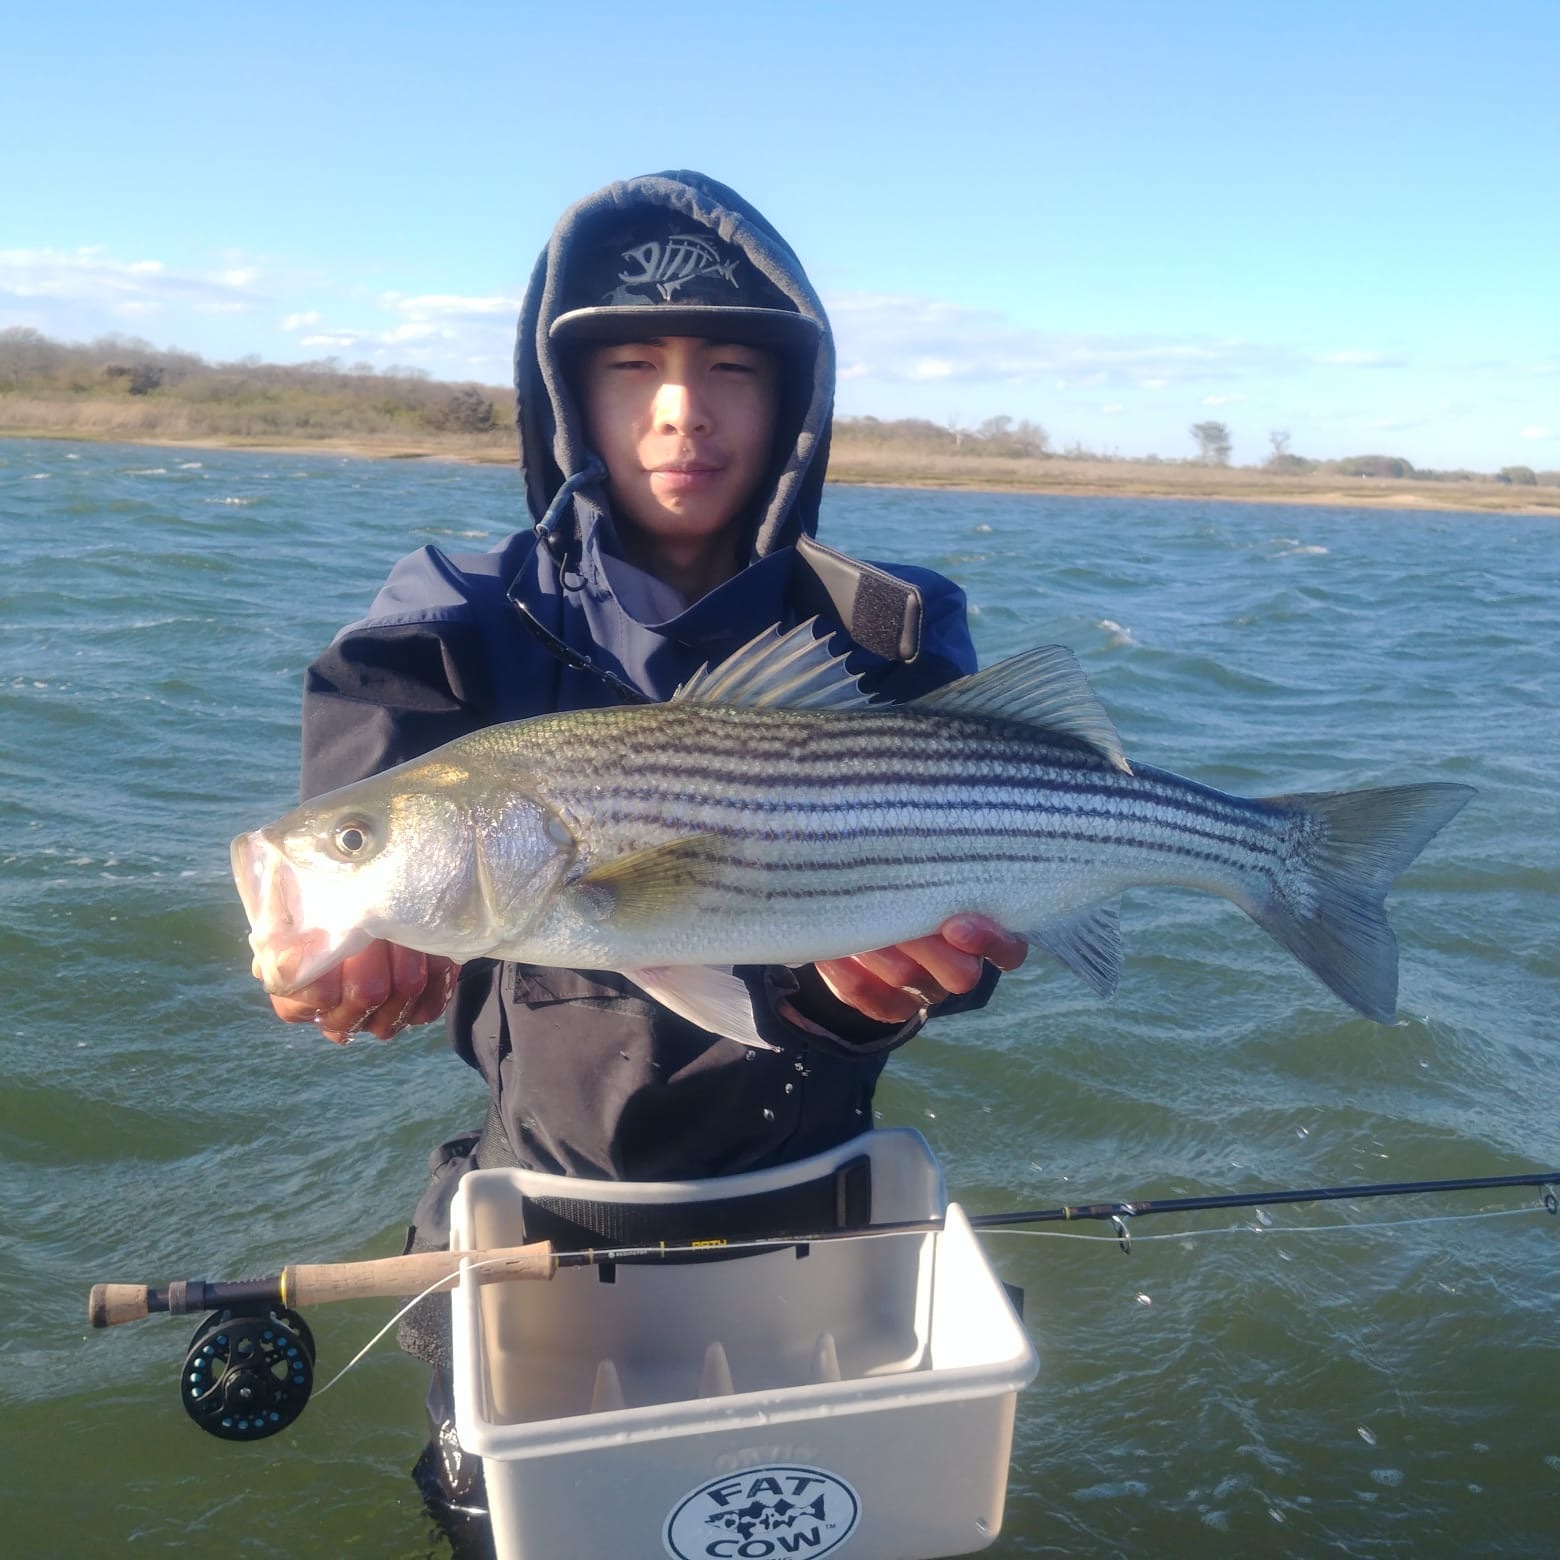 Jacky Long with a nice striped bass on fly caught in Shinnecock Bay recently. 